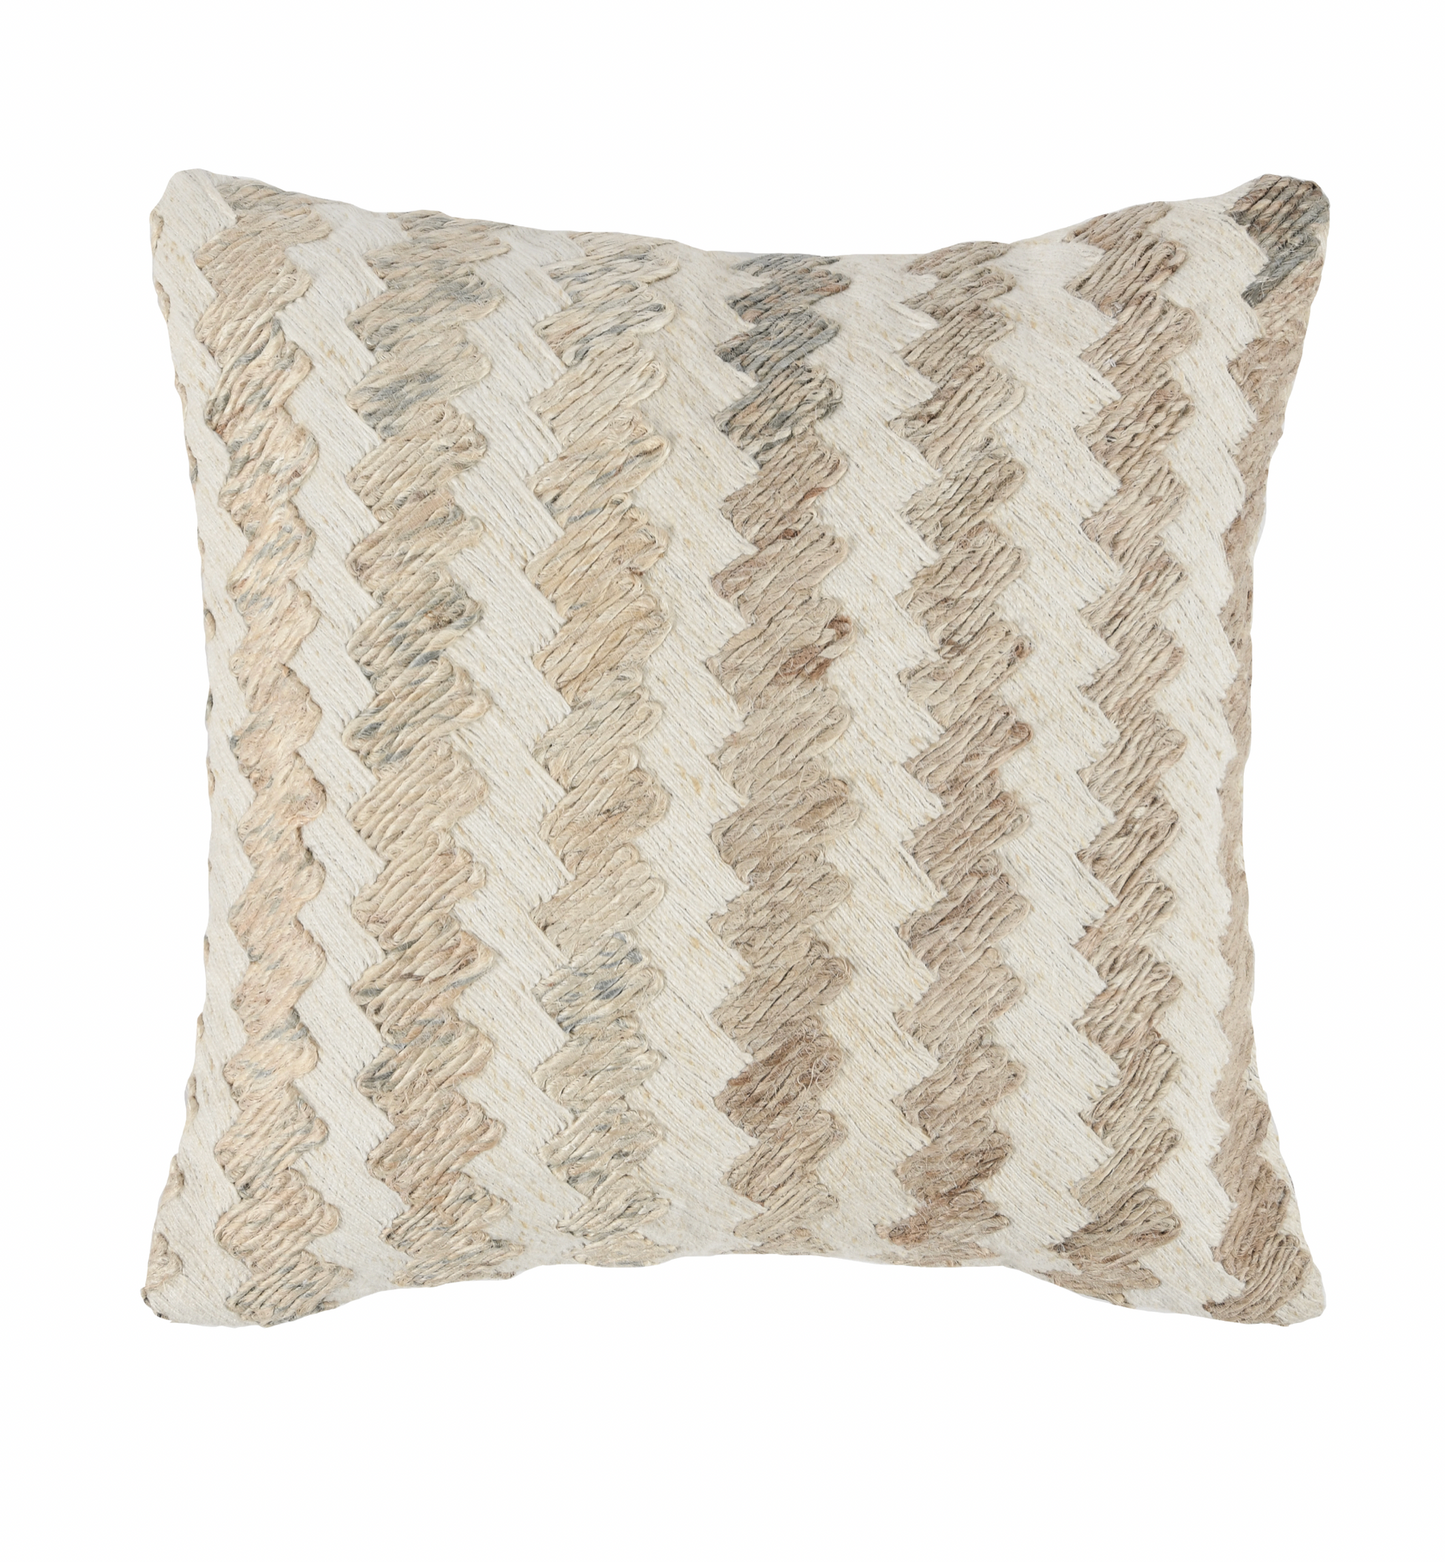 Burrows Ivory Pillow 18x18